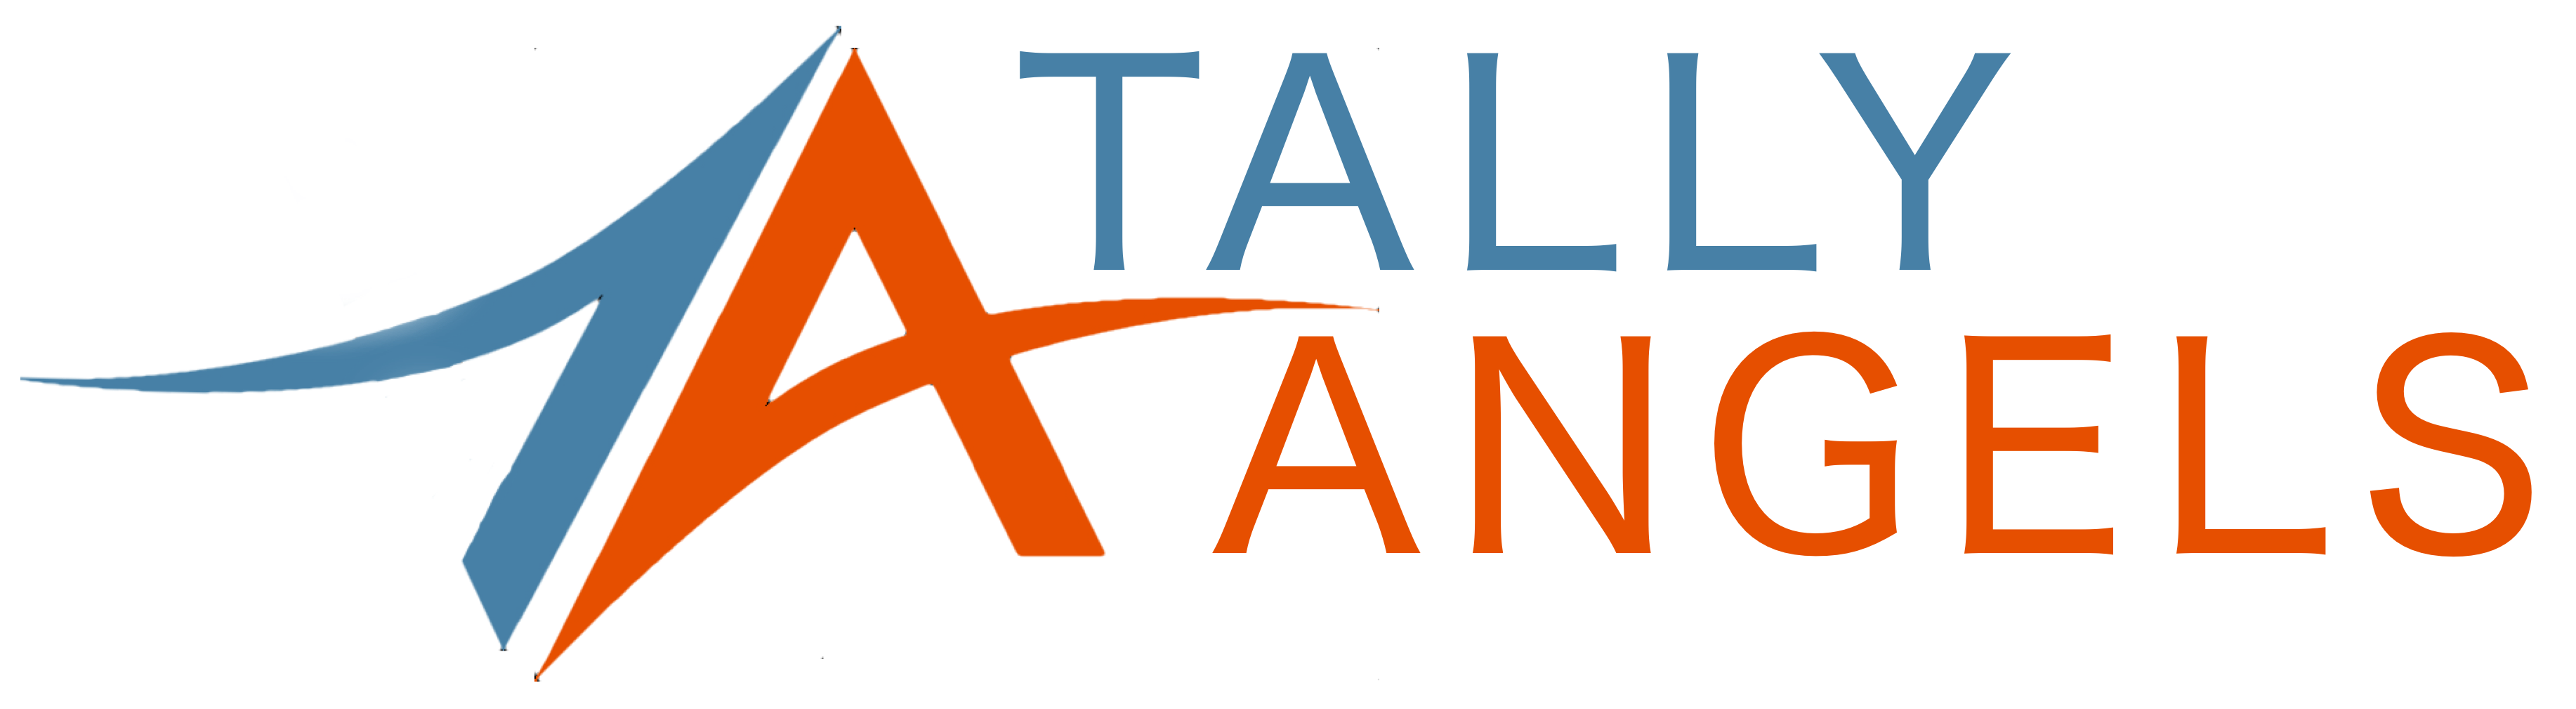 Tally Angels Healthcare Services Inc.